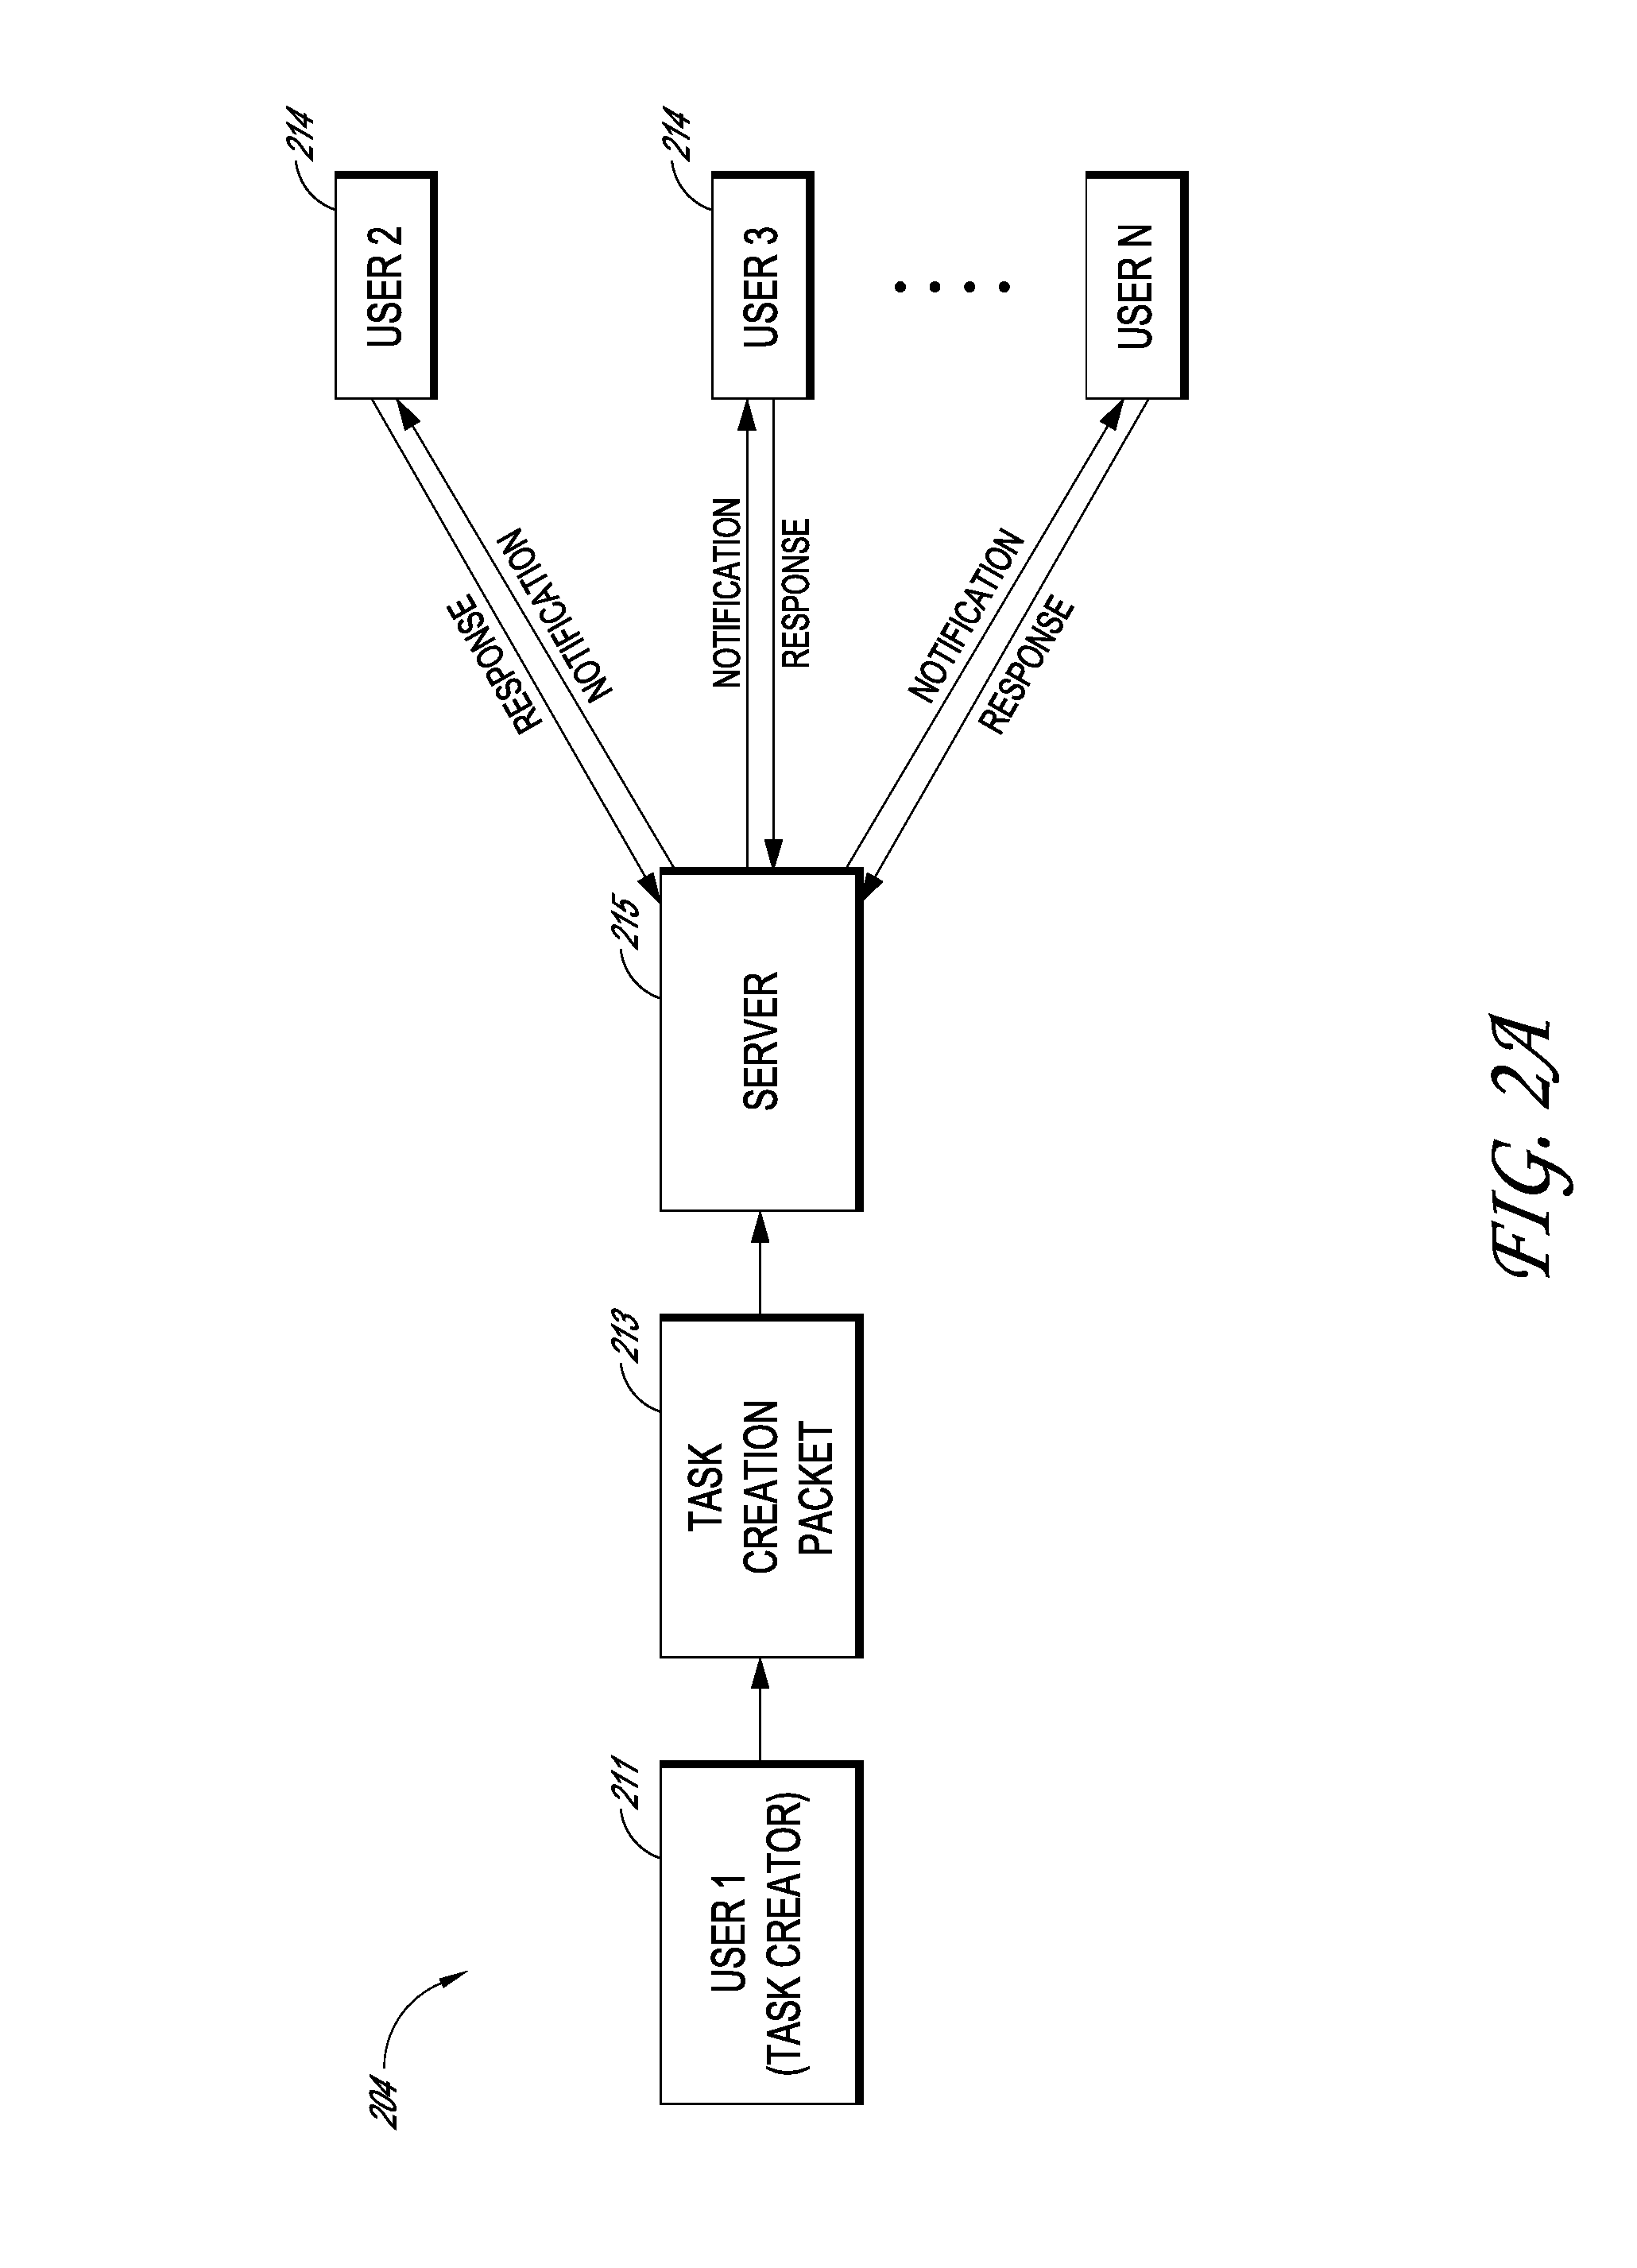 Systems and methods for creating and sharing tasks